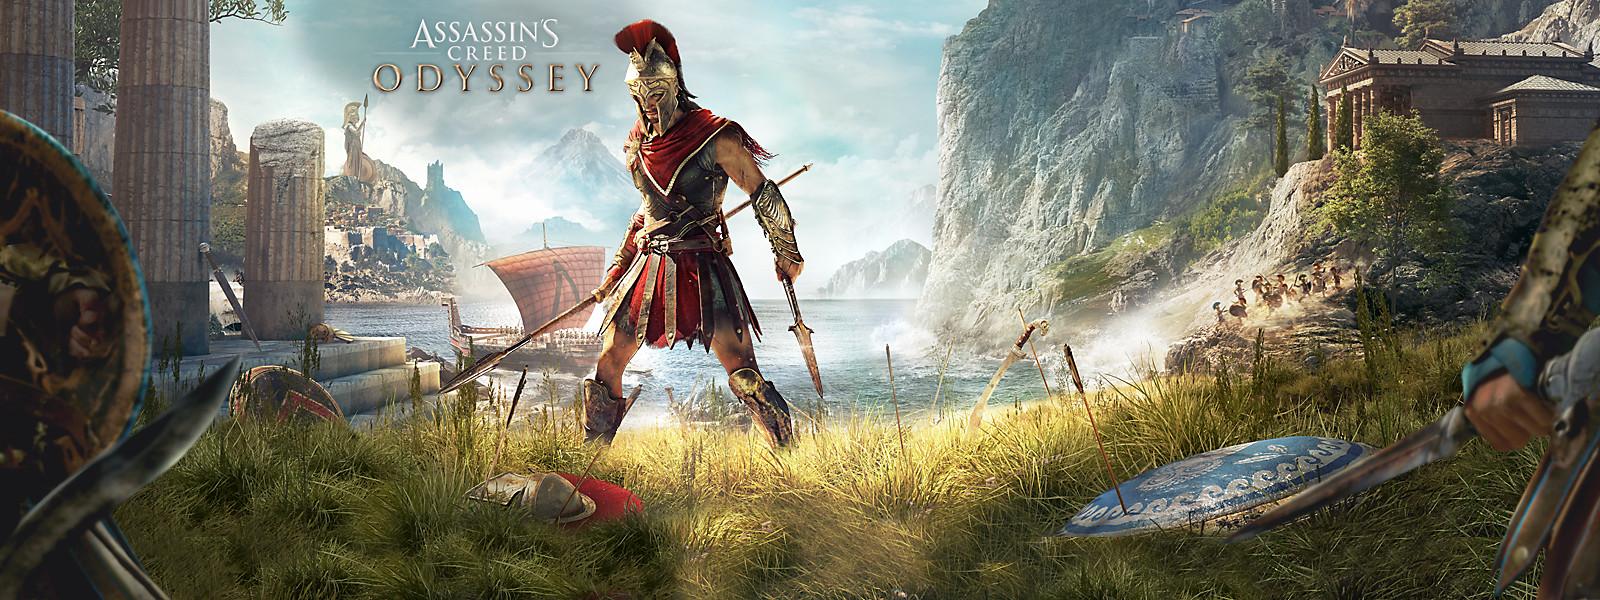 Assassins Creed III Remastered coming with Assassins Creed Odyssey